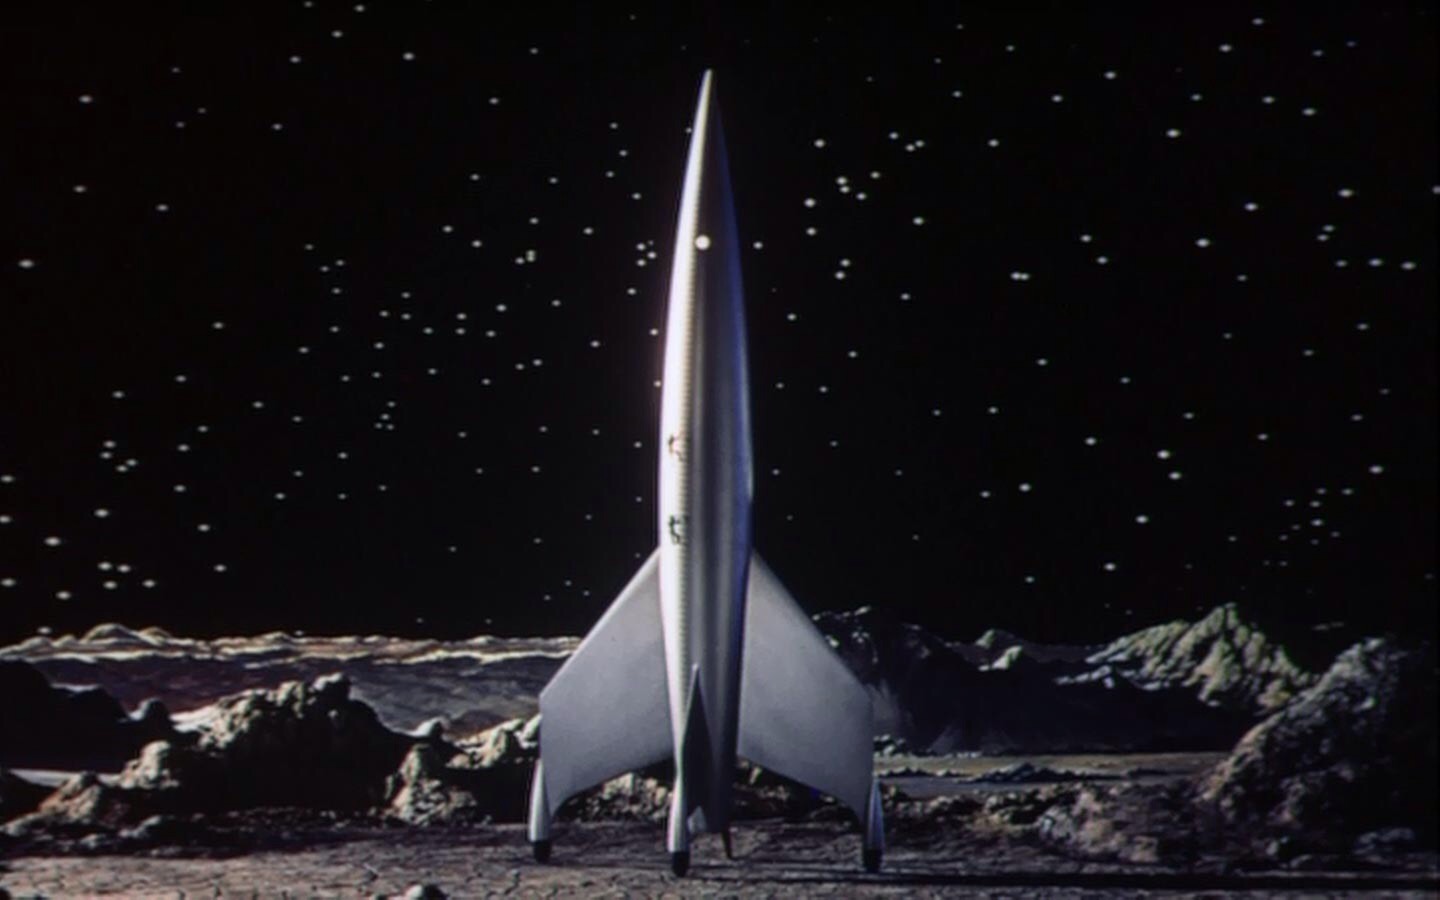 The rocket landed on The Moon in Destination Moon (1950)